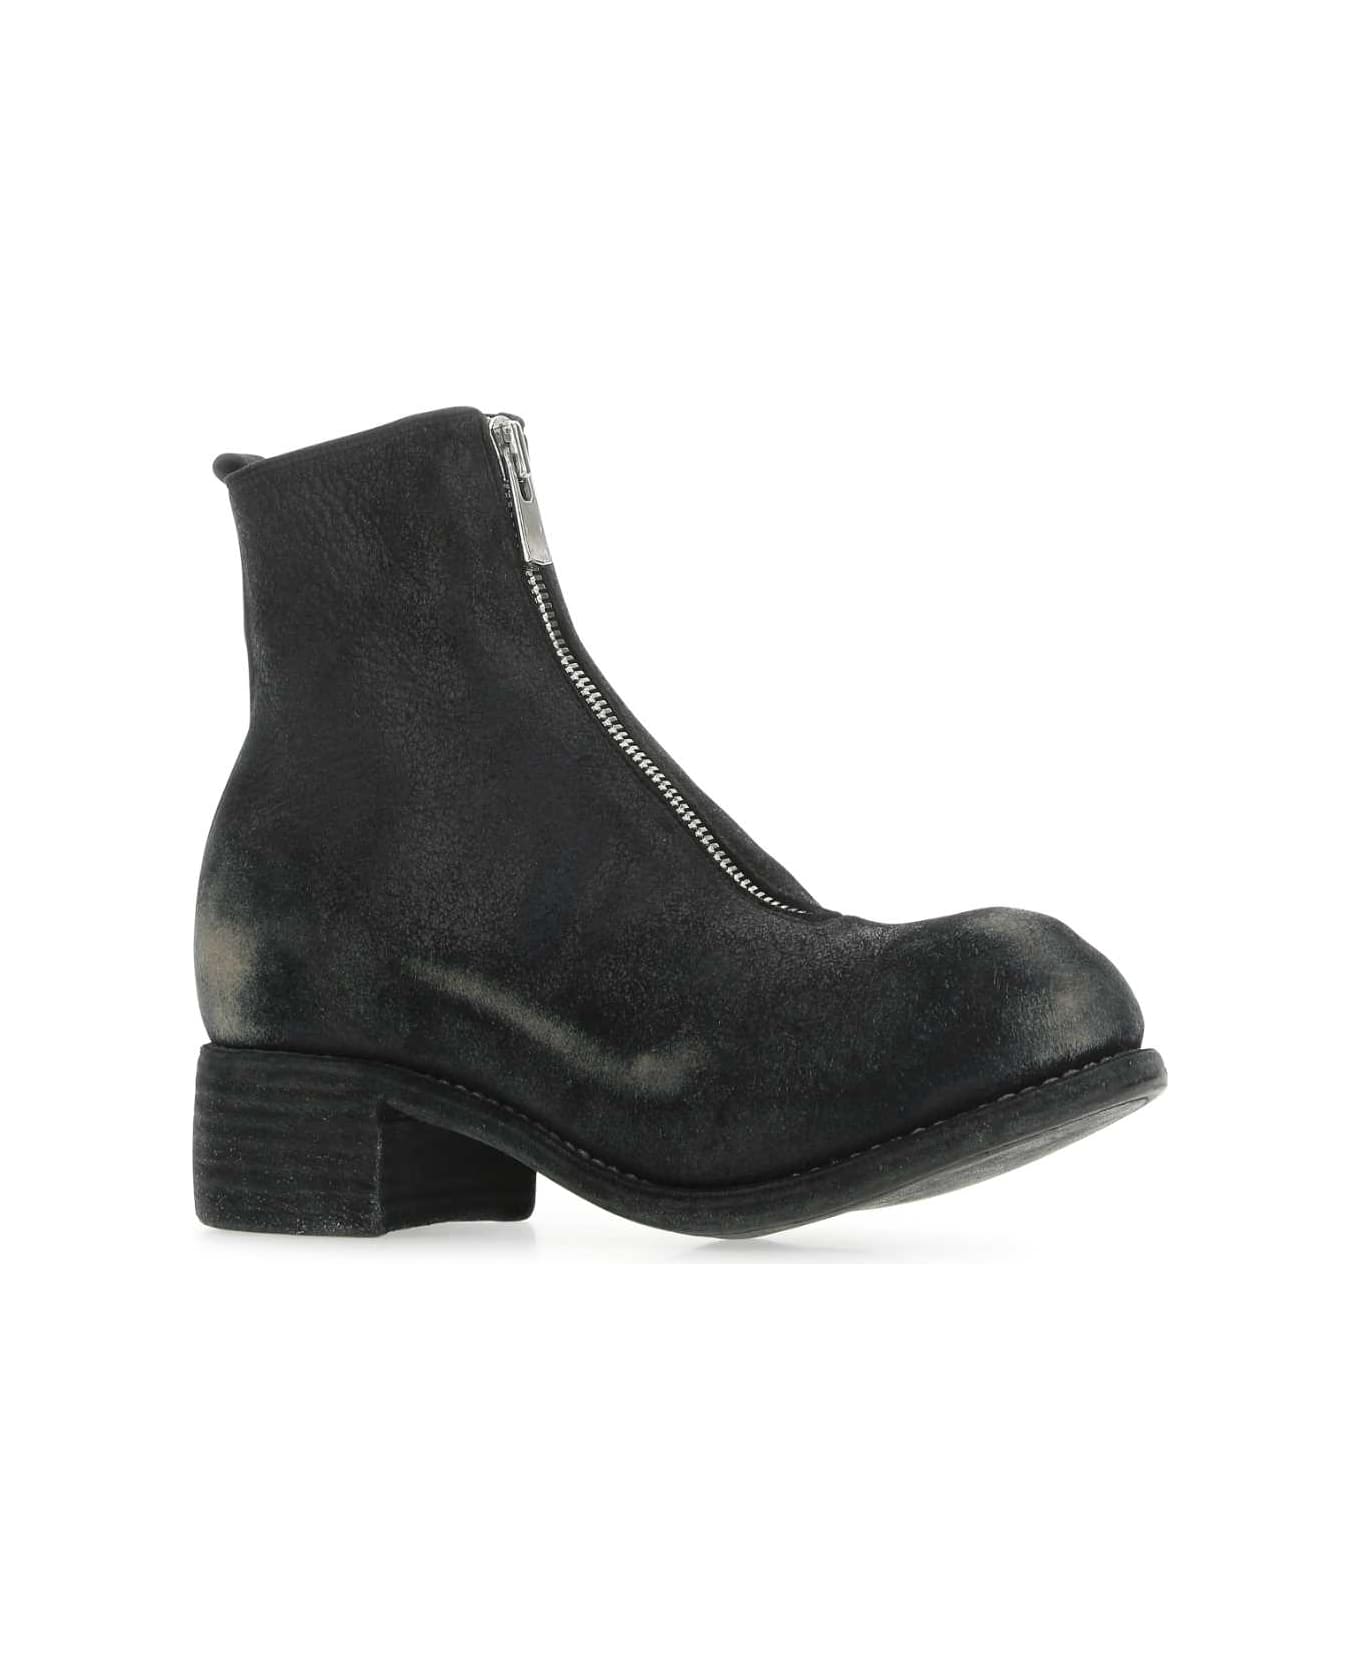 Guidi Black Red Suede Pl1 Ankle Boots - BLKT ブーツ